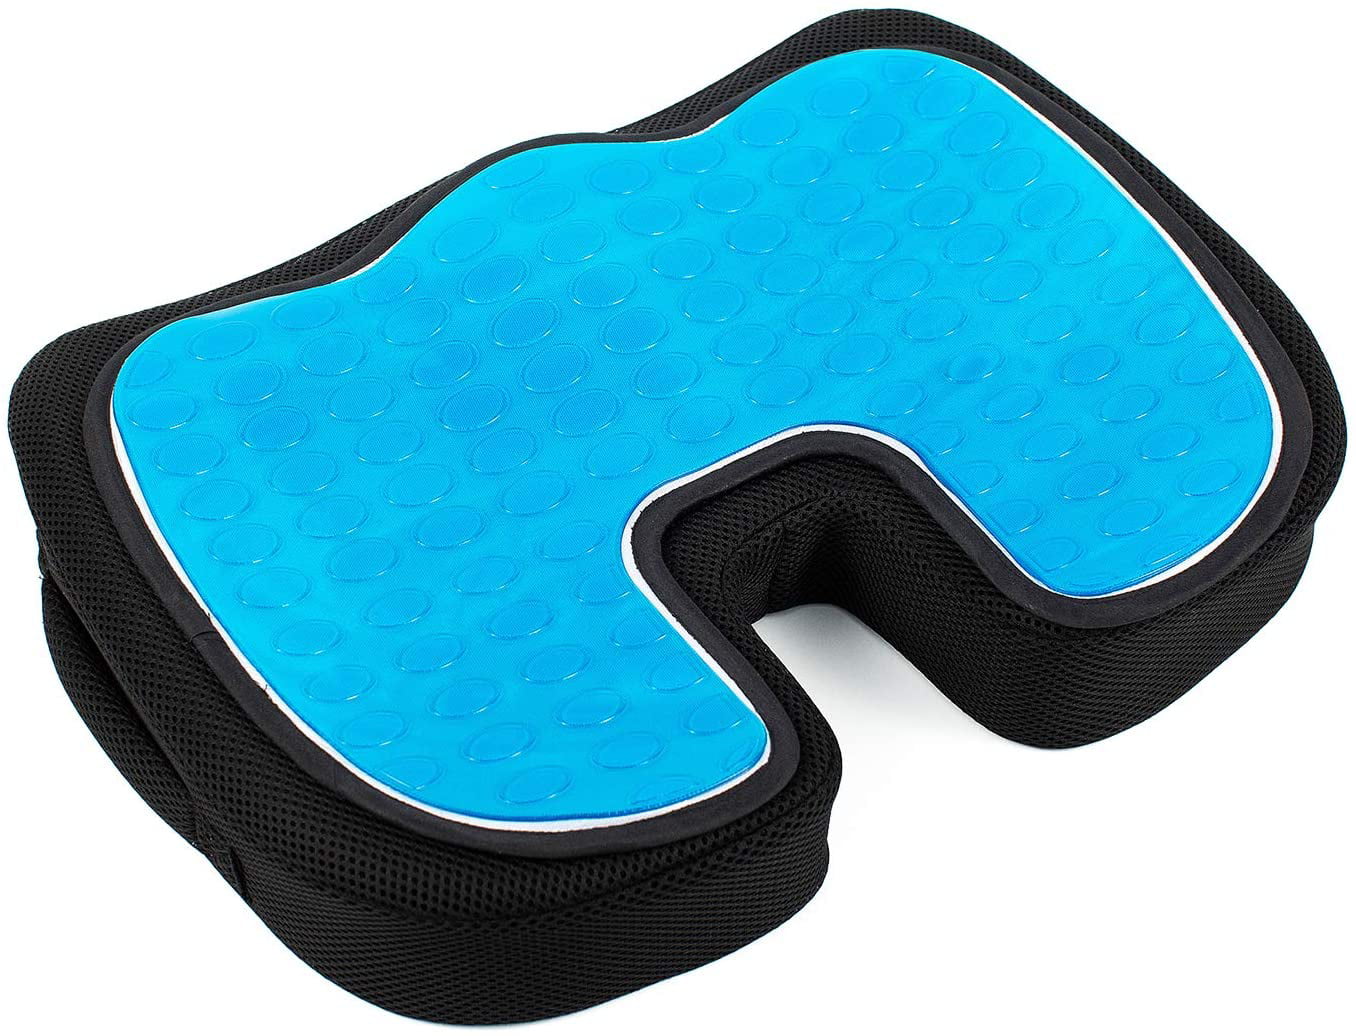 XL, Gel SEAT Cushion Gel Seat Cushion Cooling Coxyx Seat Cushions for Pain Relief with Removable Cover Memory Foam Seat Cushion for Car Office Seat Cushions for Chair-Tailbone,Sciatica Pain Relief 